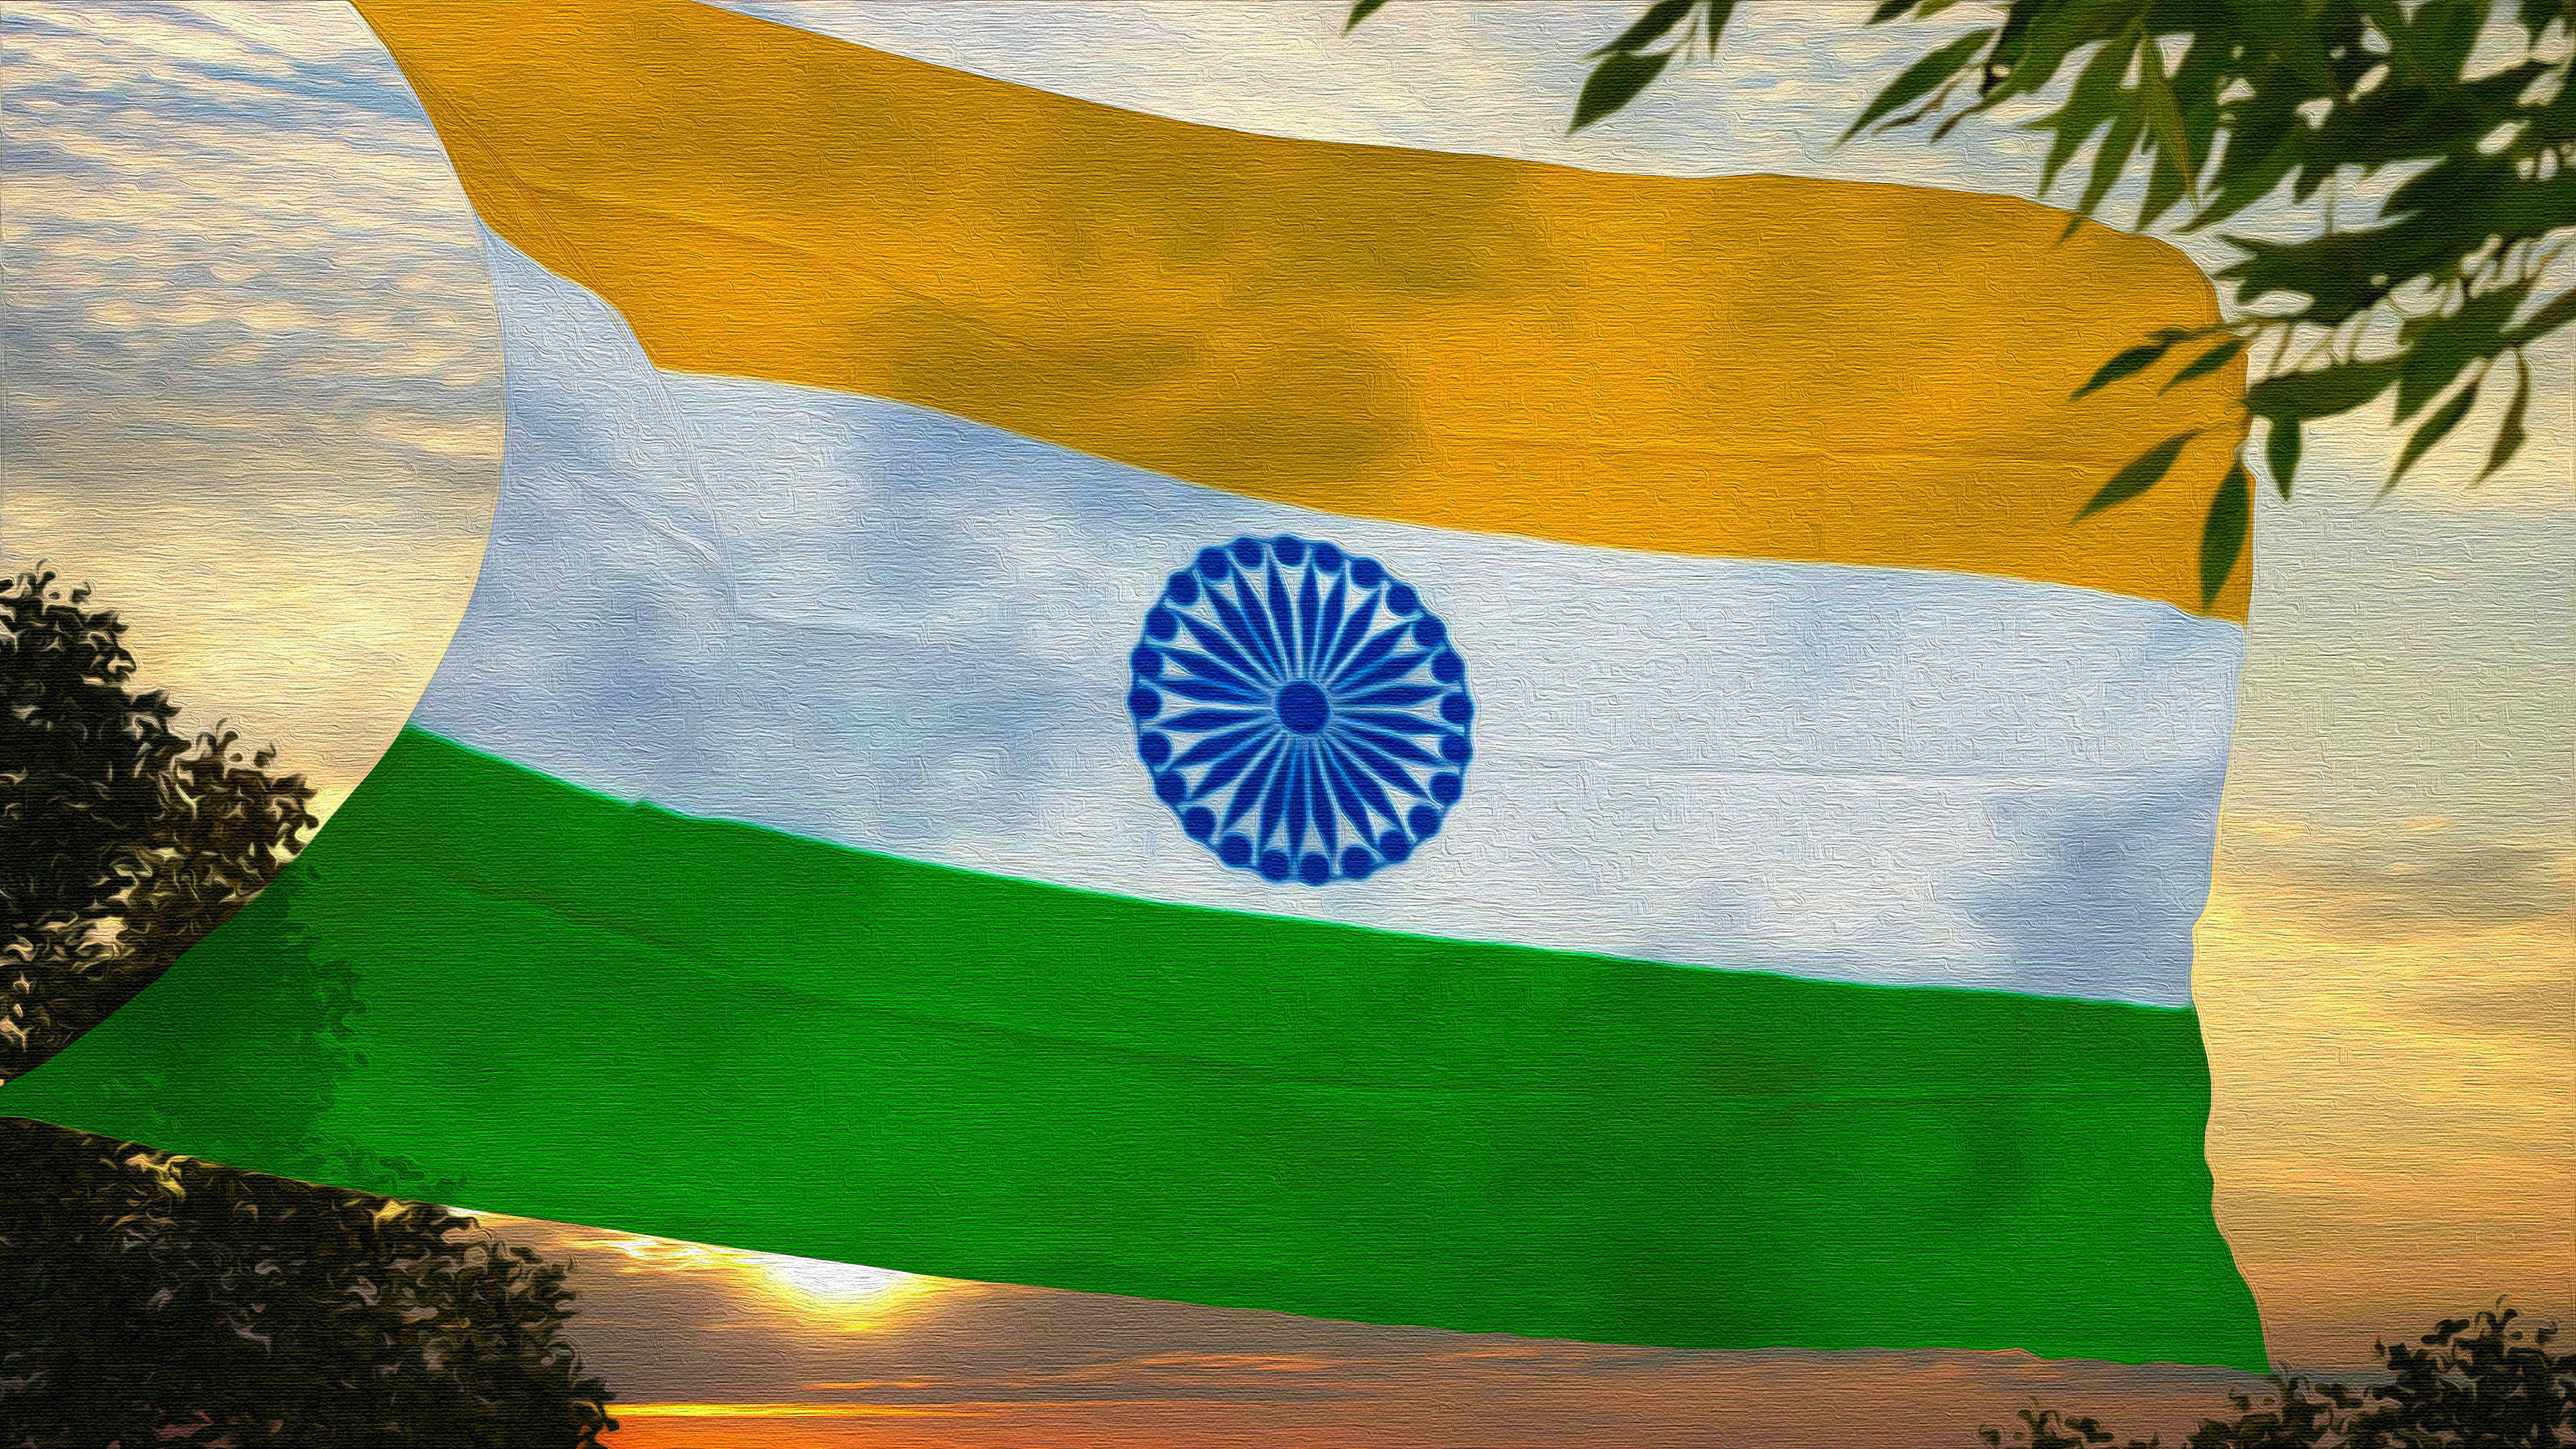 Download Indian Flag Hd Waved In The Air Wallpaper 